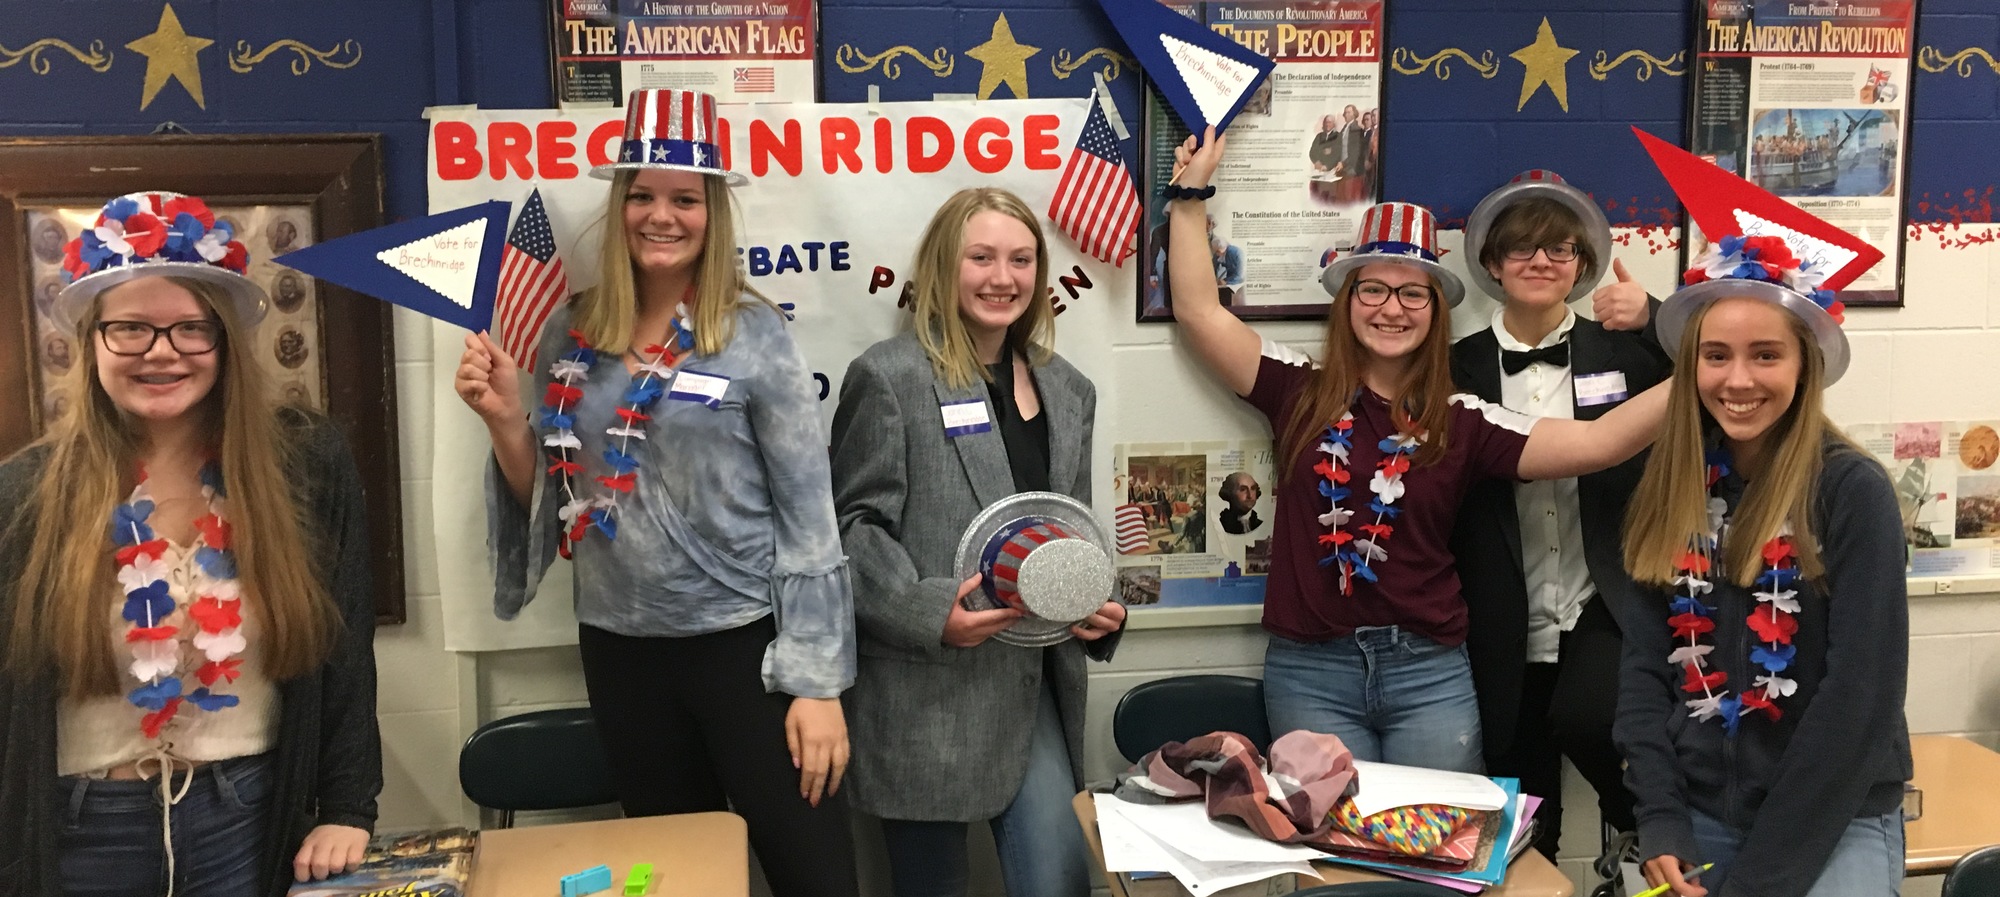 Students in red, white, and blue for 1860 election reenactment for social studies class